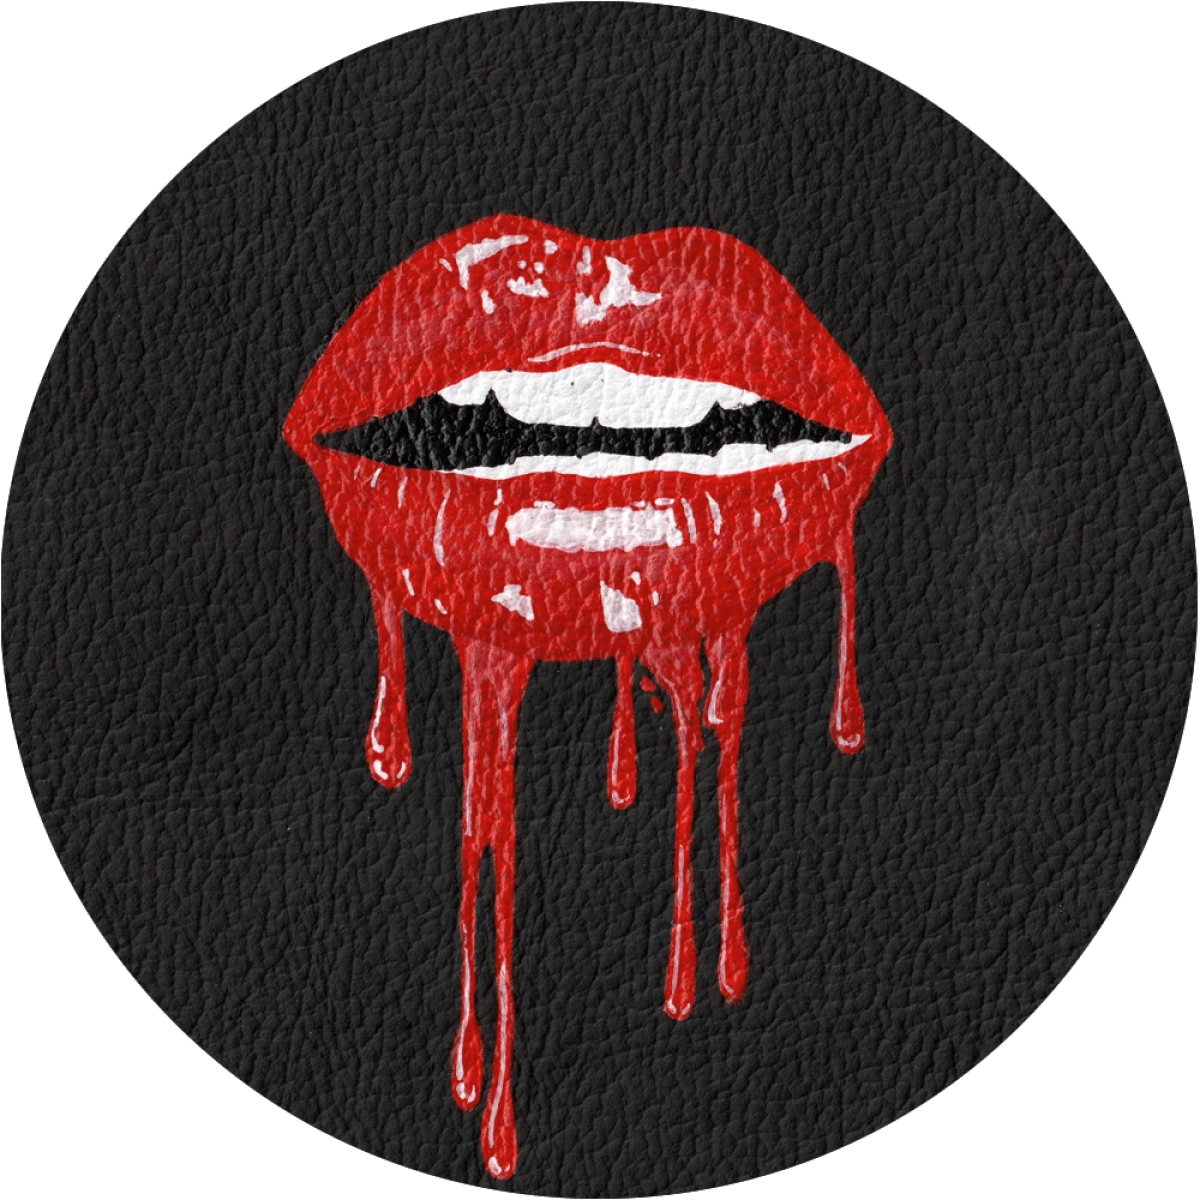 A Red Lips Dripping From A Black Circle